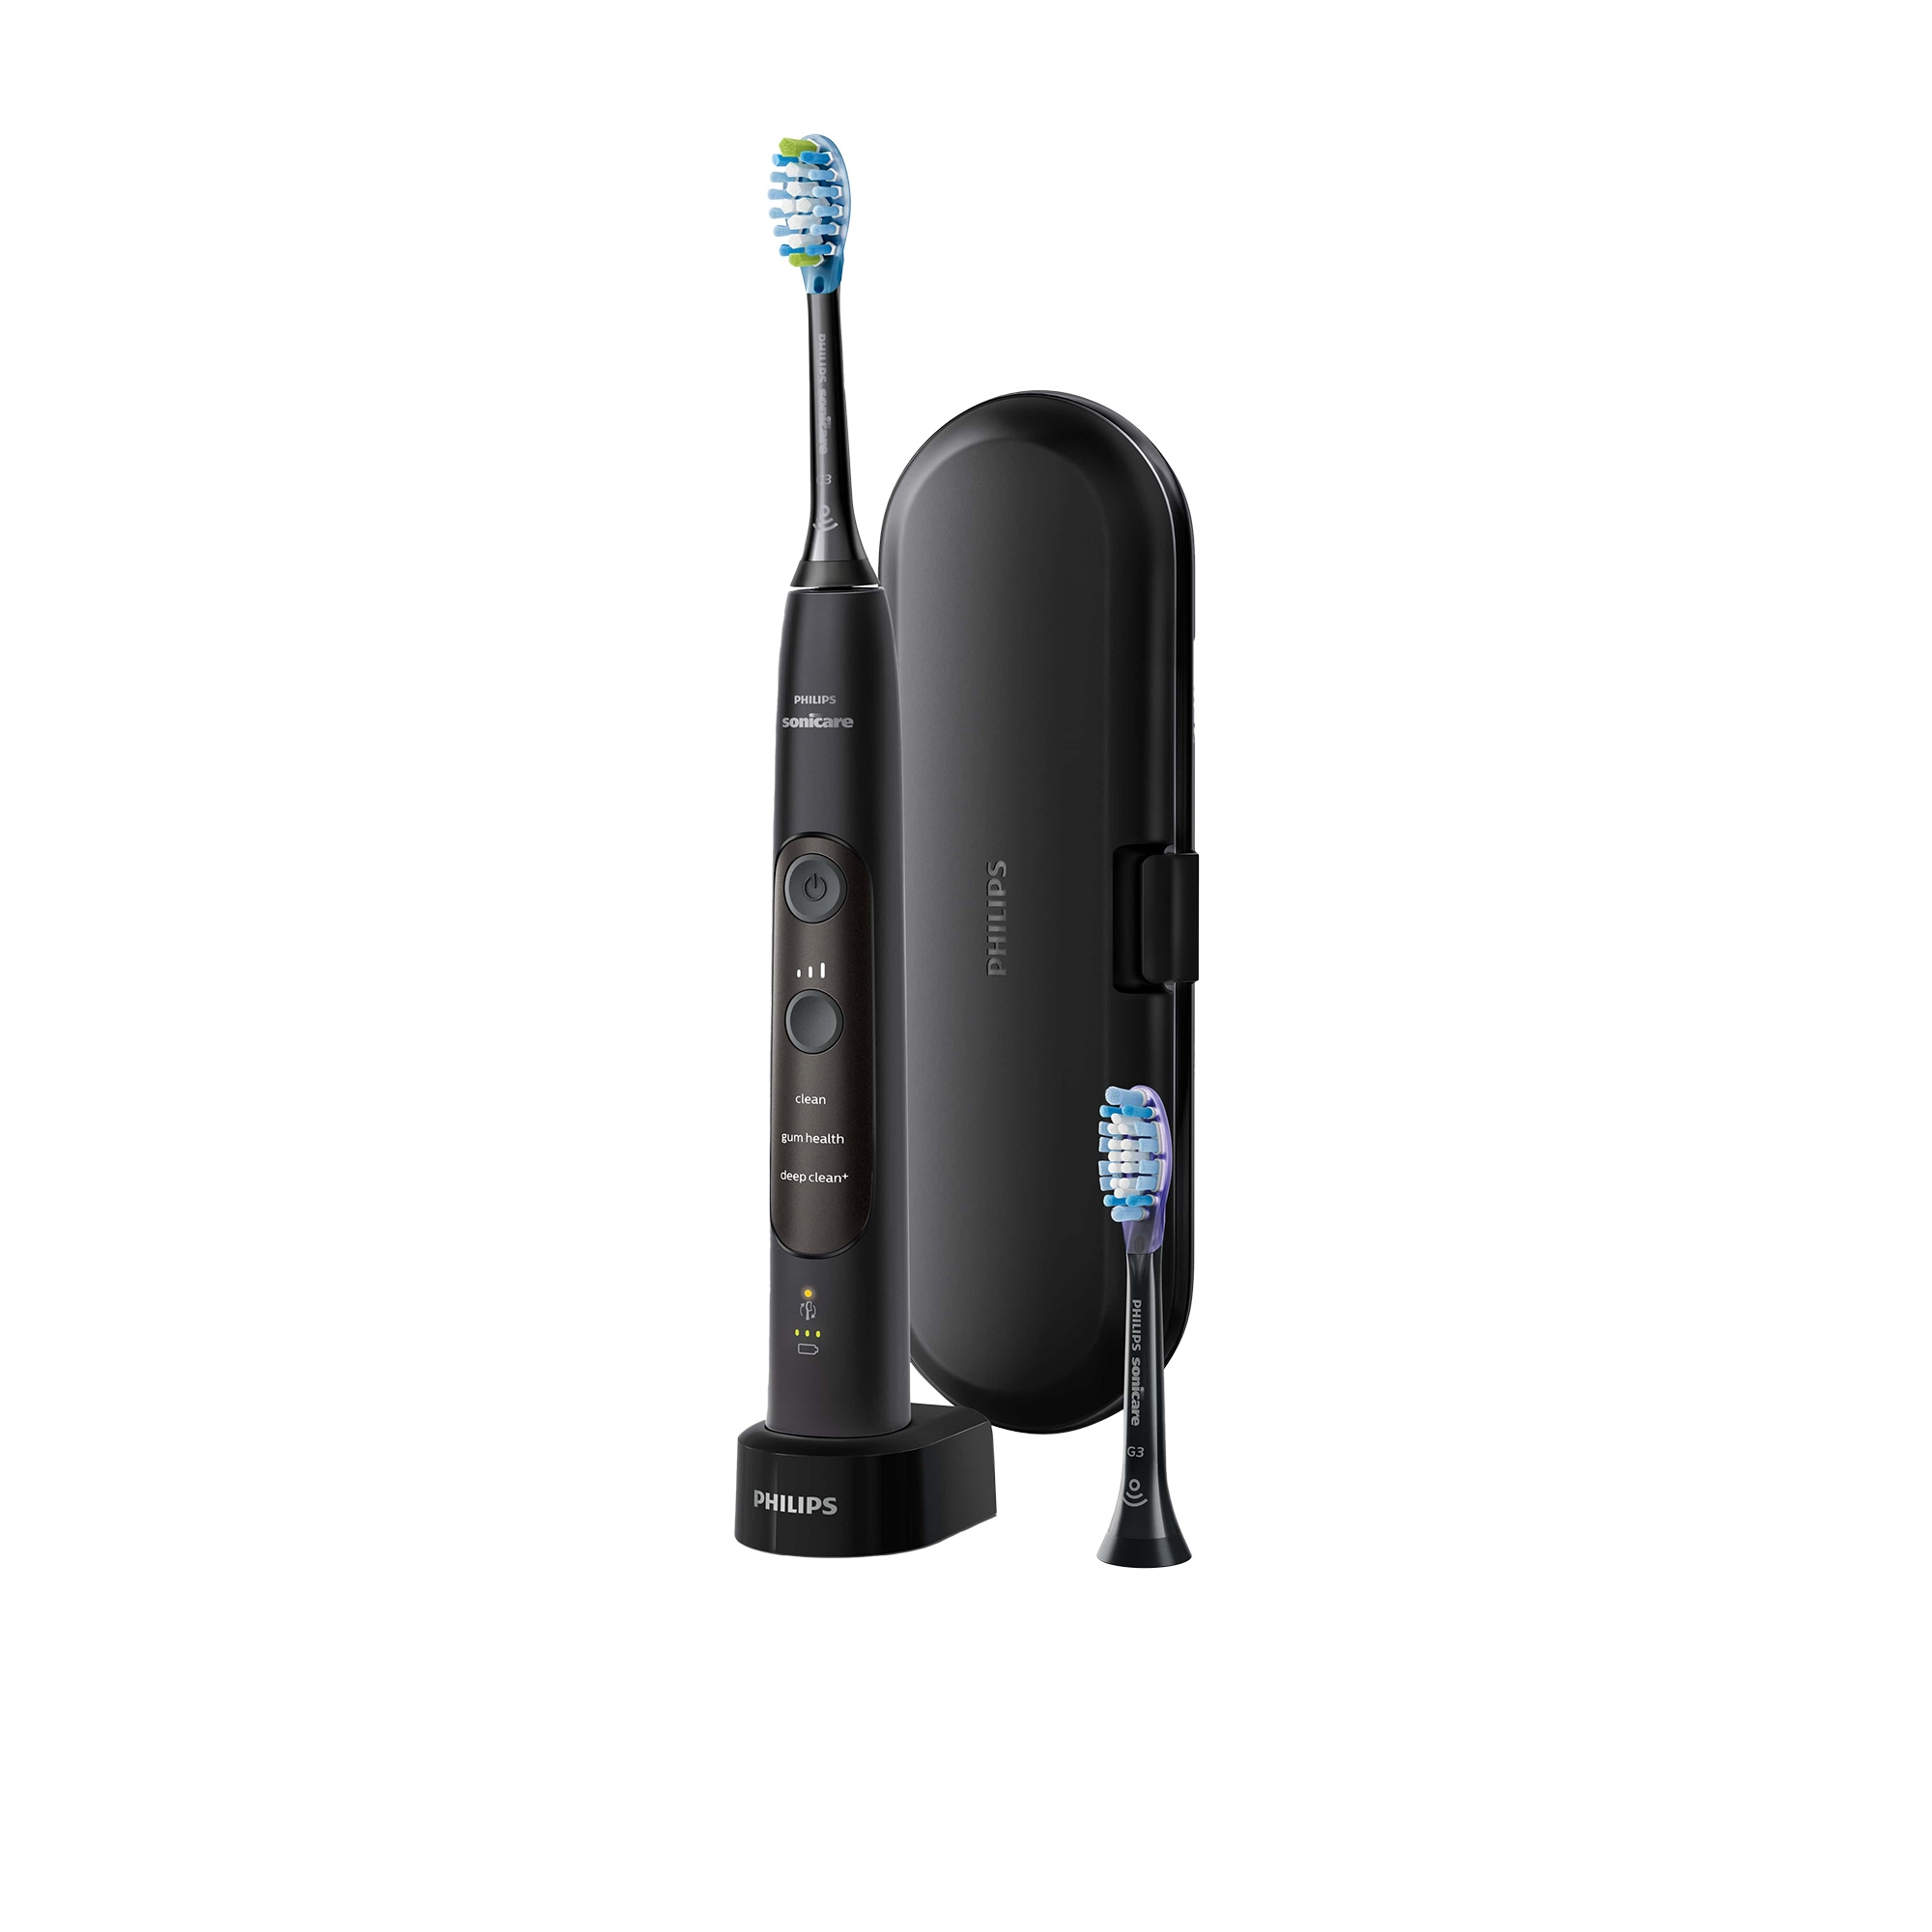 Philips Sonicare 7300 ExpertClean Electric Toothbrush Black Image 1